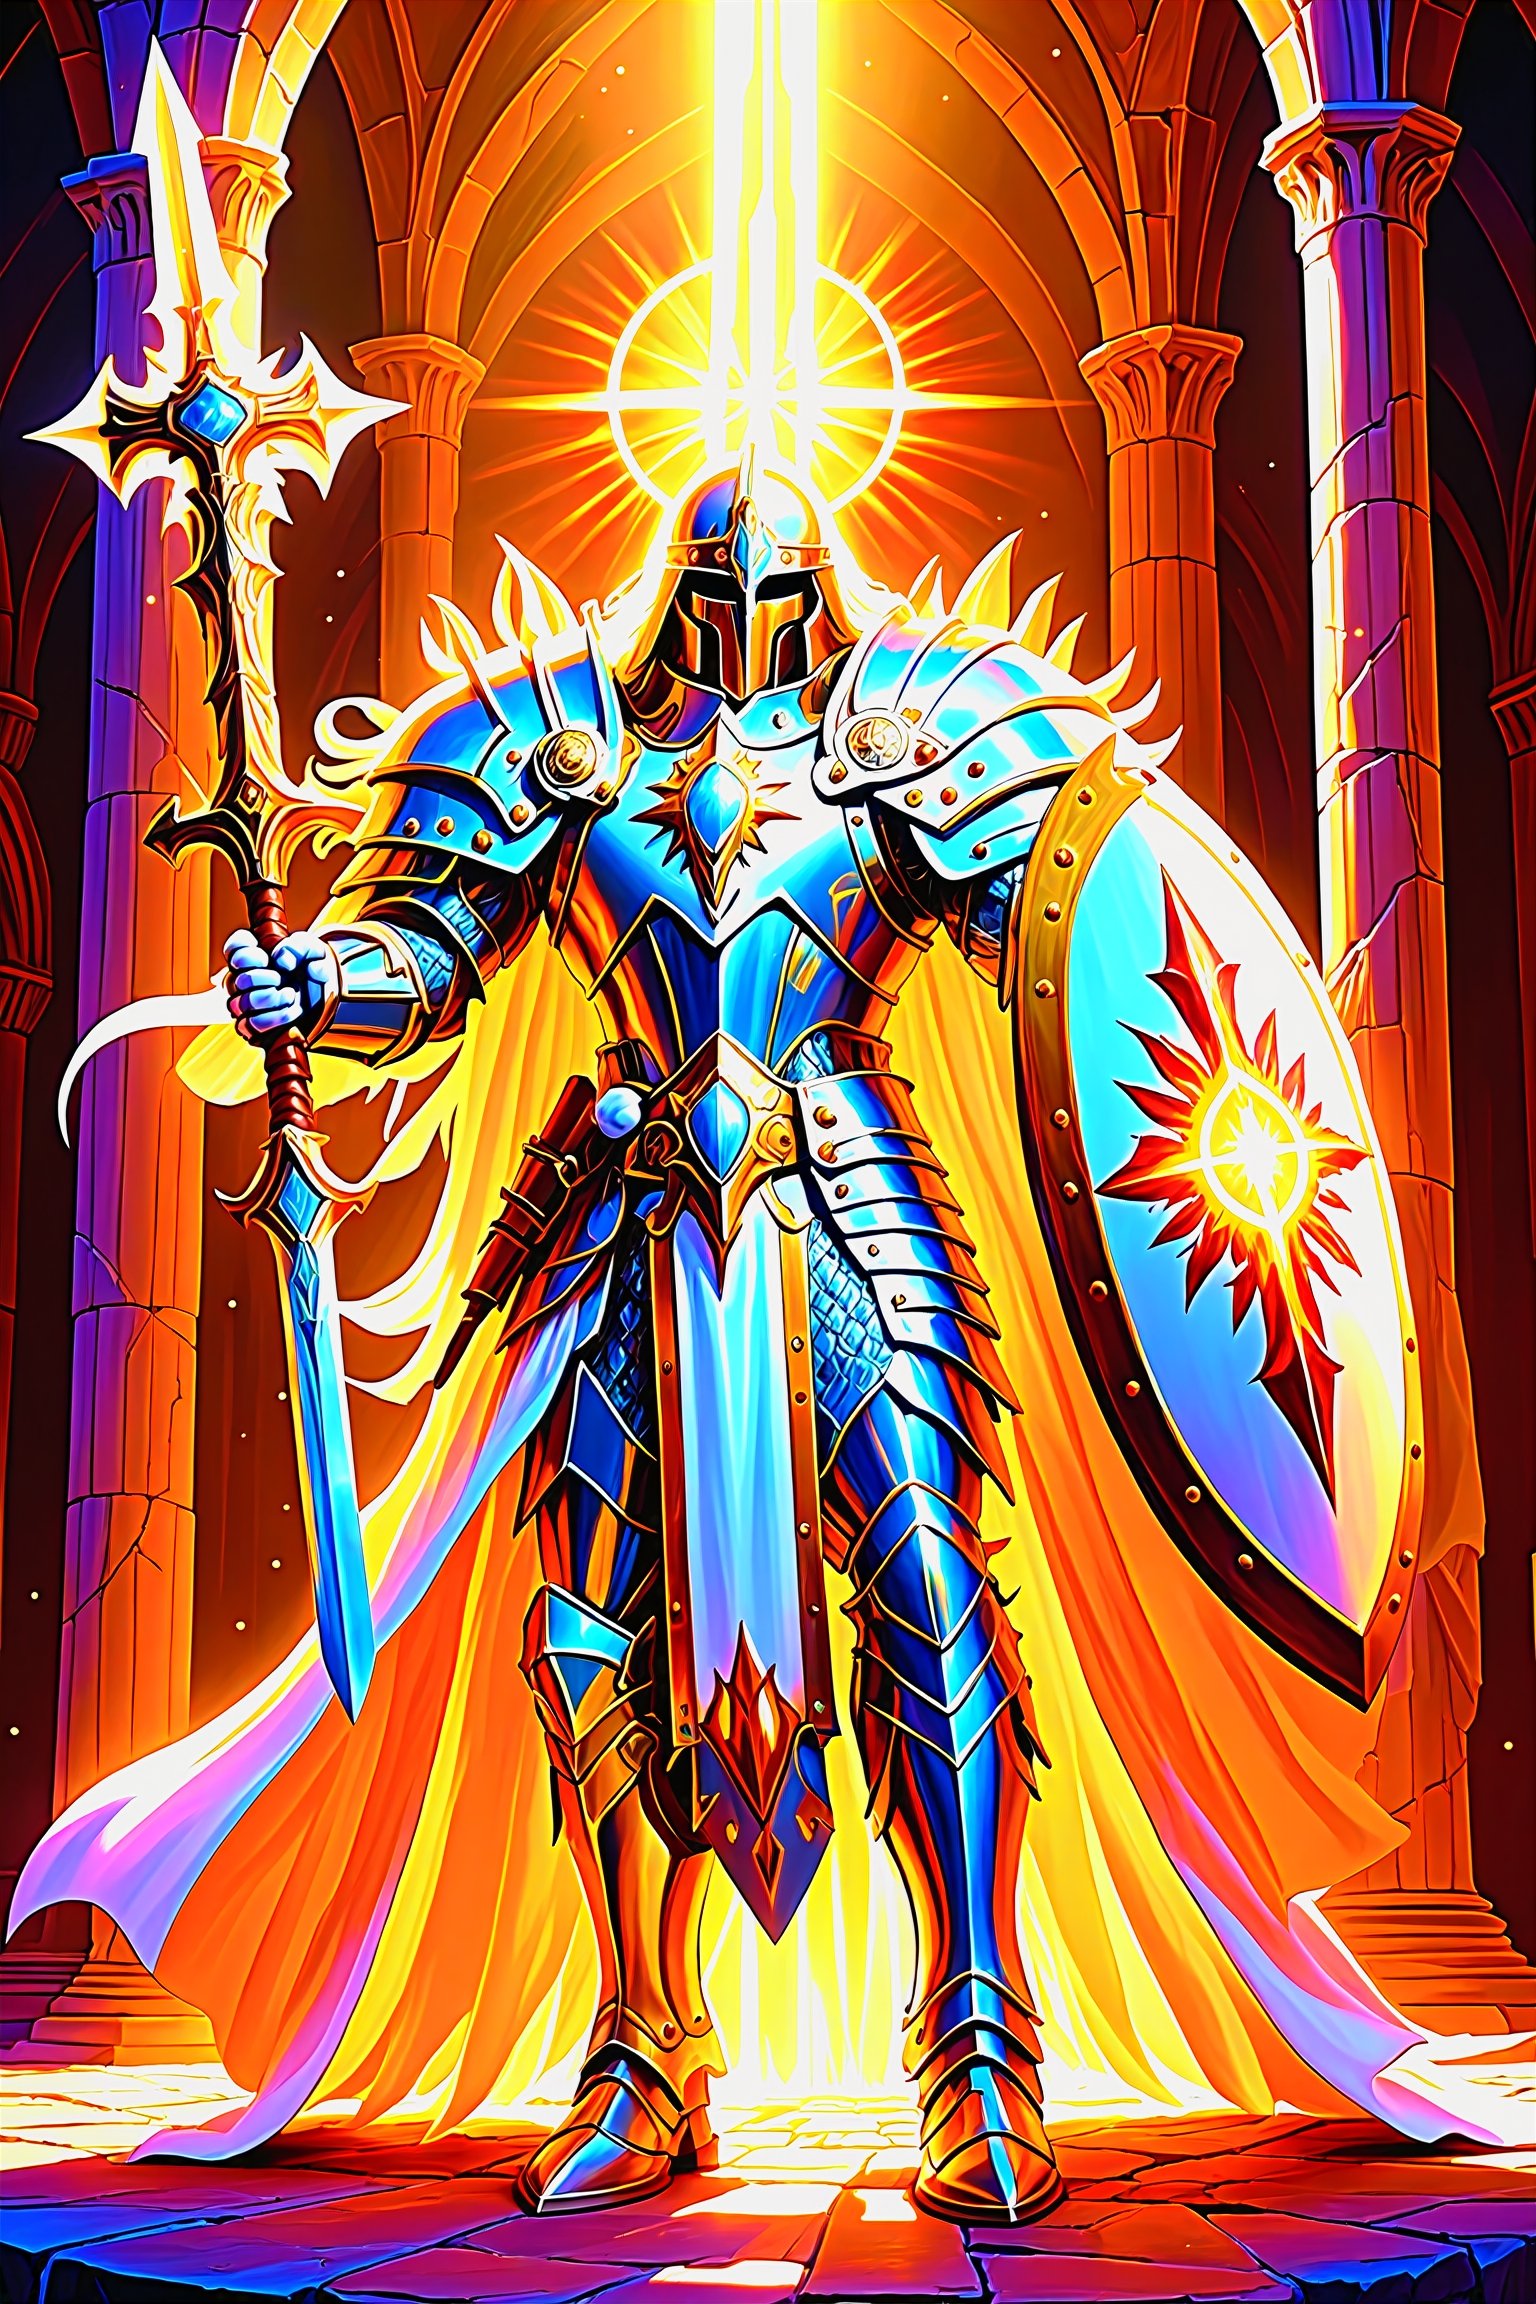 A paladin glowing holy light in Everquest classic box art style, power metal manowar judas priest iron maiden megadeath death carcass cover art style, best quality, psychedelic, vivid colors, trippy, colorful, original, unique, intriguing, showcase the radiant glory of this holy crusader, gleaming pristine shimmering plate armor, shield, glowing so brilliantly radiantly blinding white holy divine light from raised warhammer in hand, angelic divine heavenly holy city in the sky sunlight rays beams of light celestial beings ultimate godly divine power of justice and good and truth and righteousness, please get it right this time, psychedelic alien worlds, sprawling cosmic colorscapes, 3d toon style,   